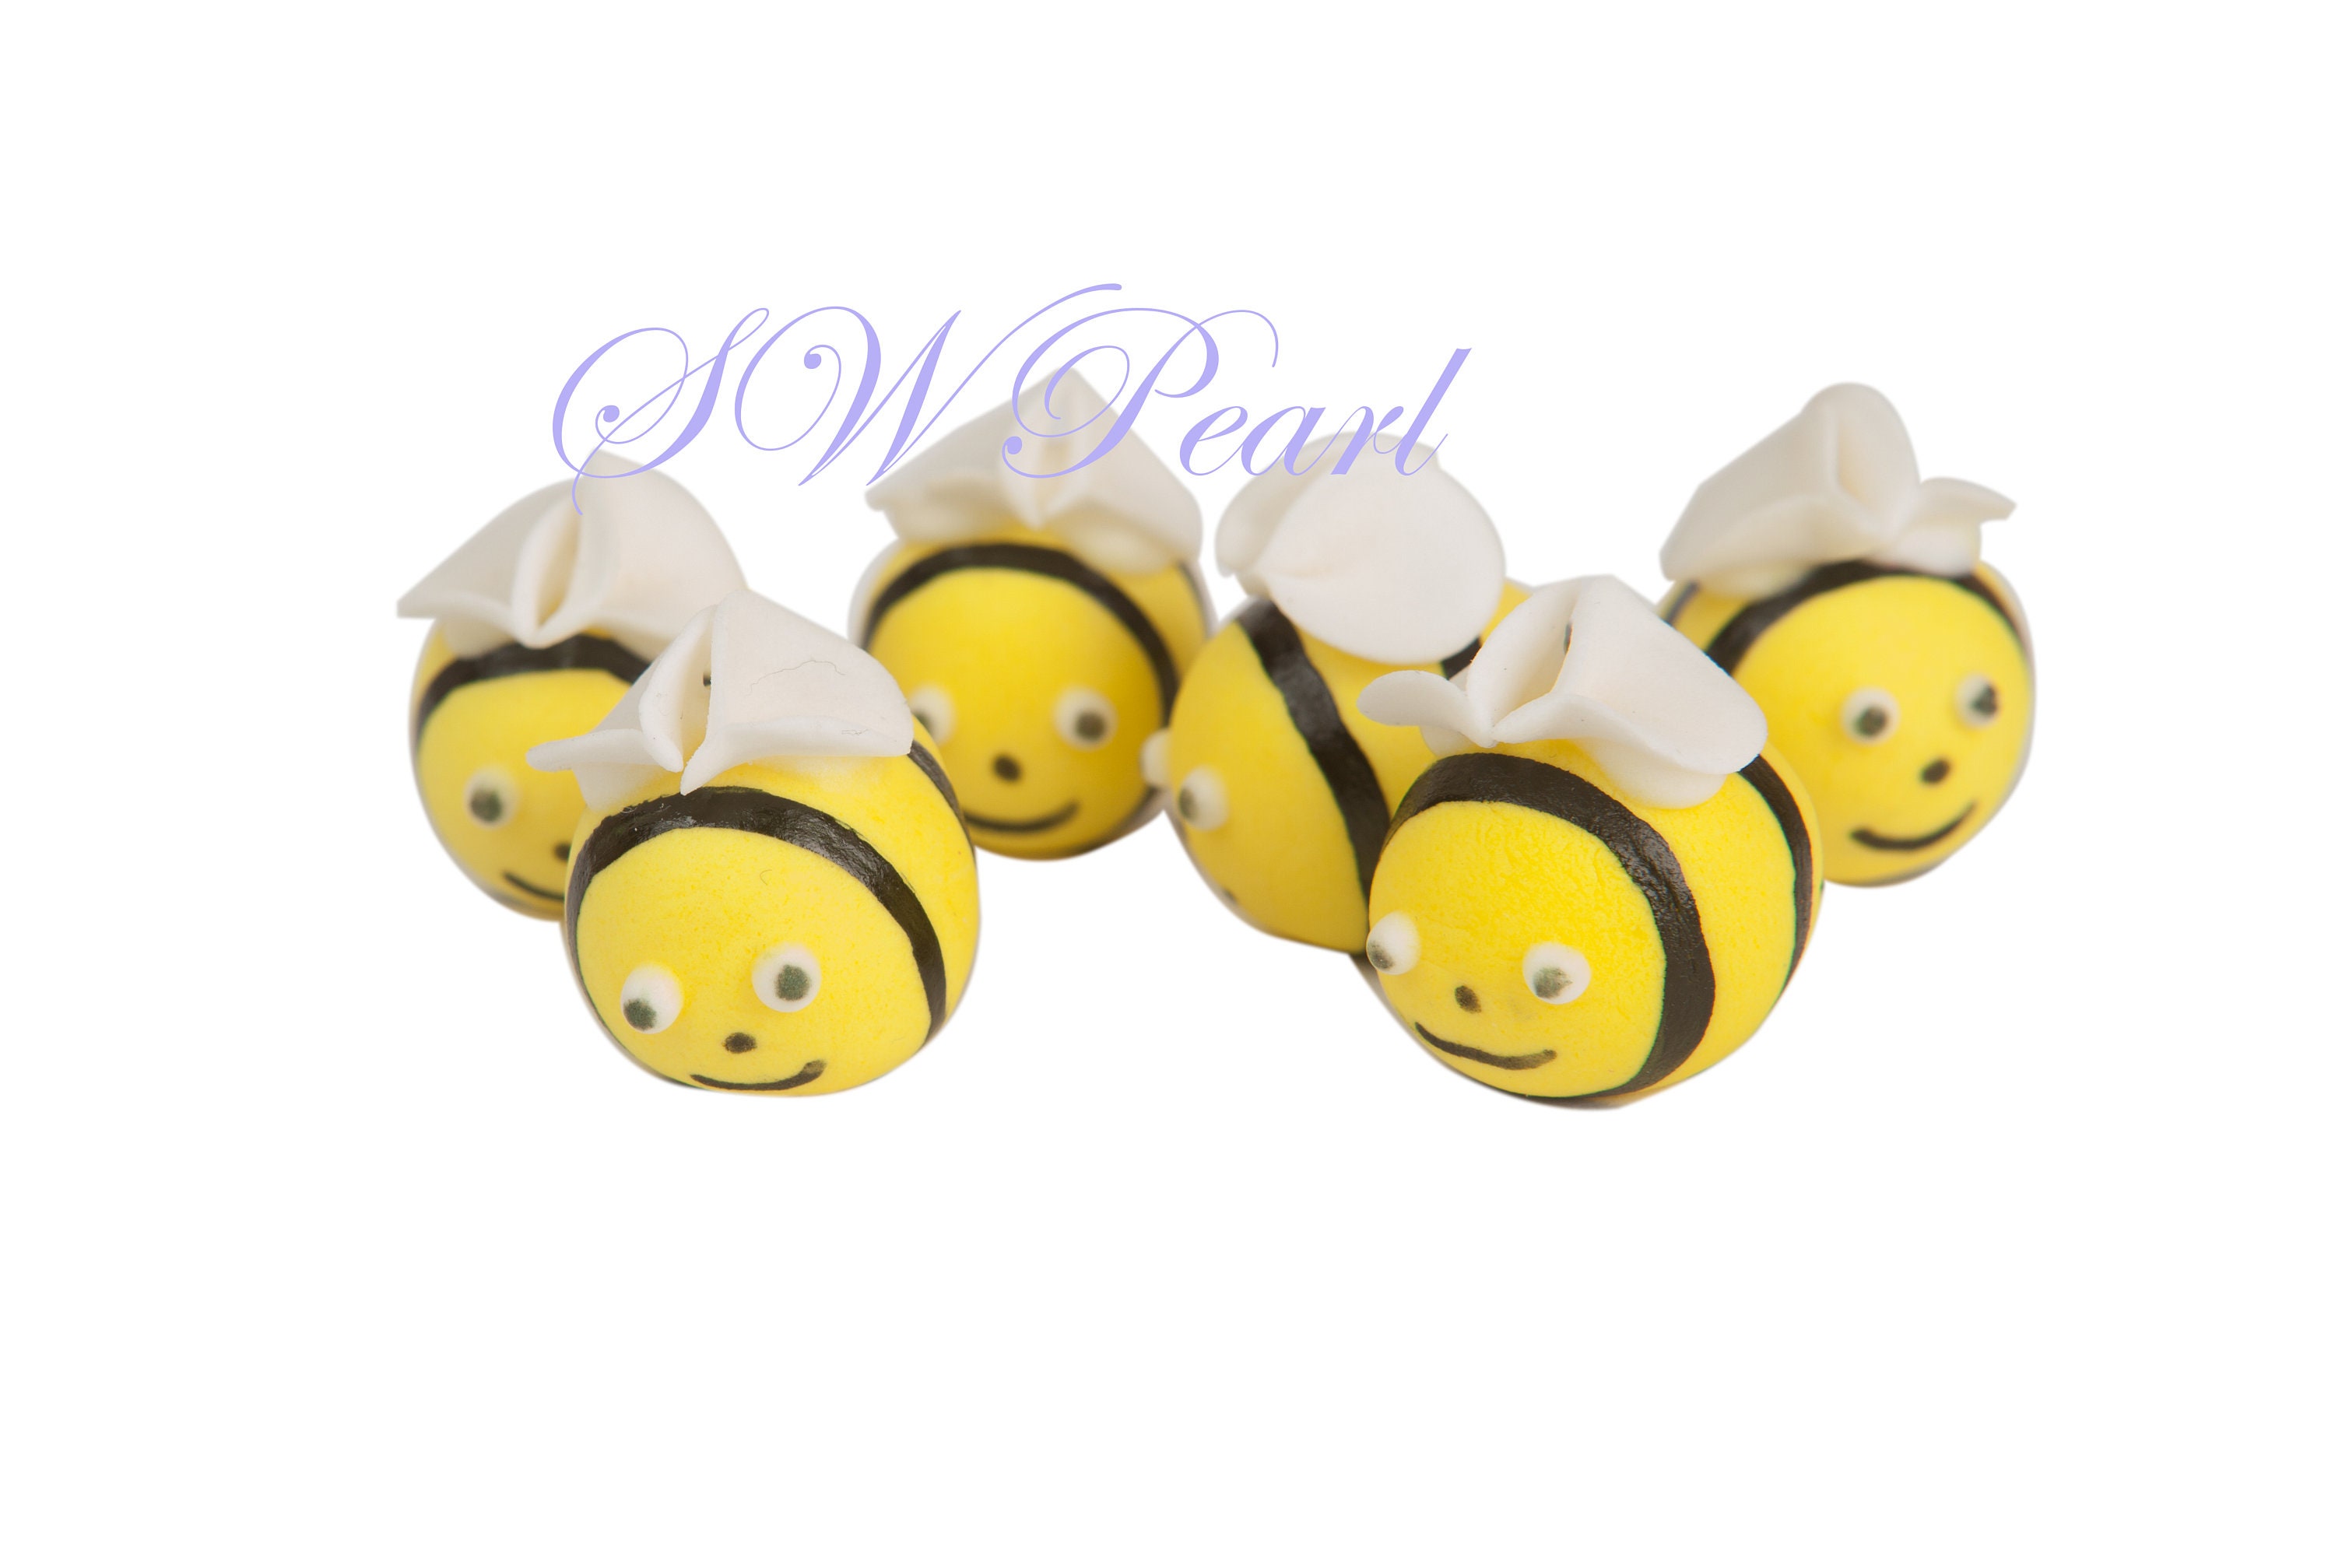 24 BUMBLE BEE EDIBLE Sugar Cupcake or Cake Toppers by Decopac Bee